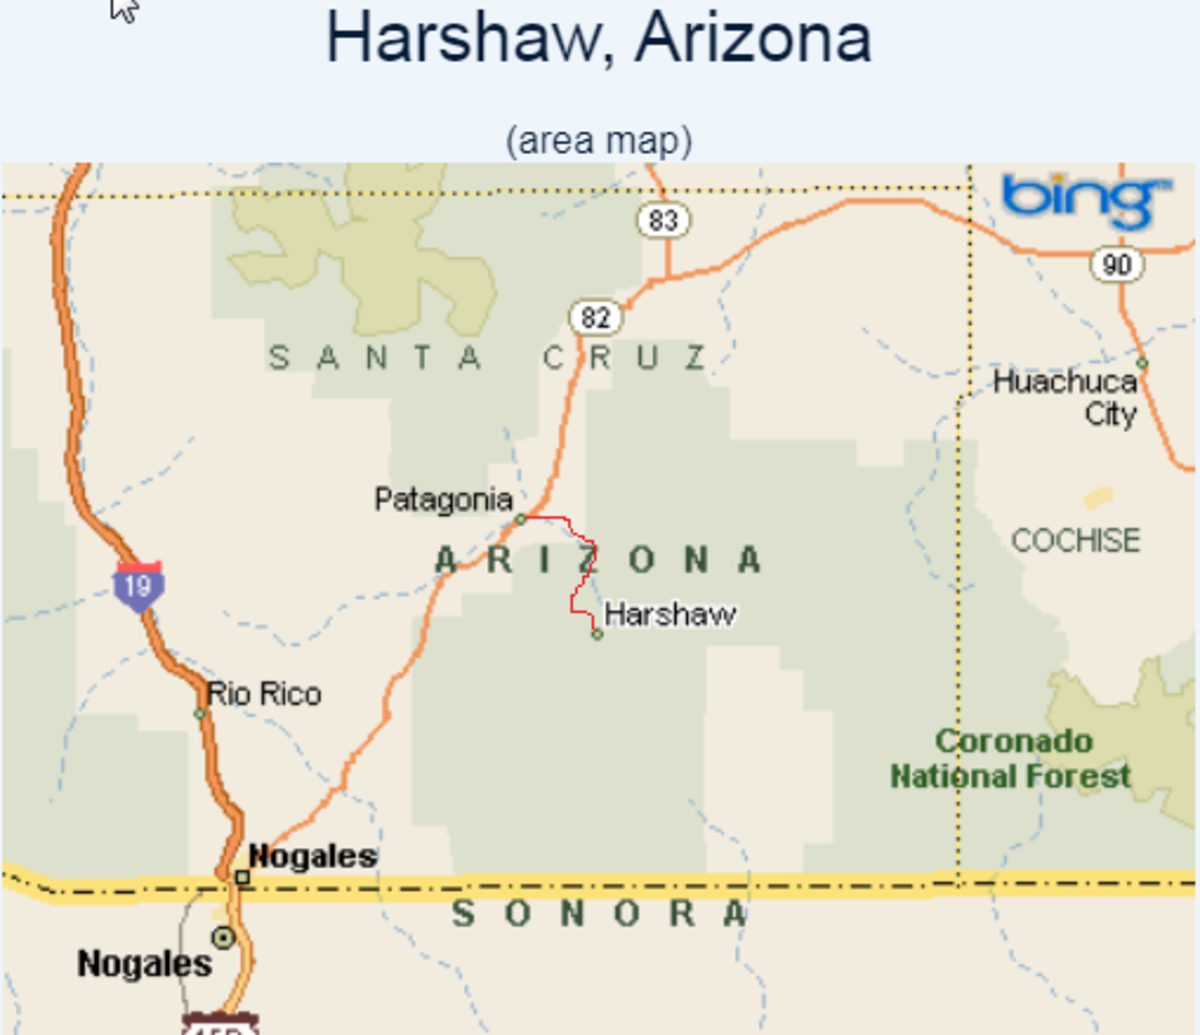 Jack and Nell's route to Harshaw, AZ